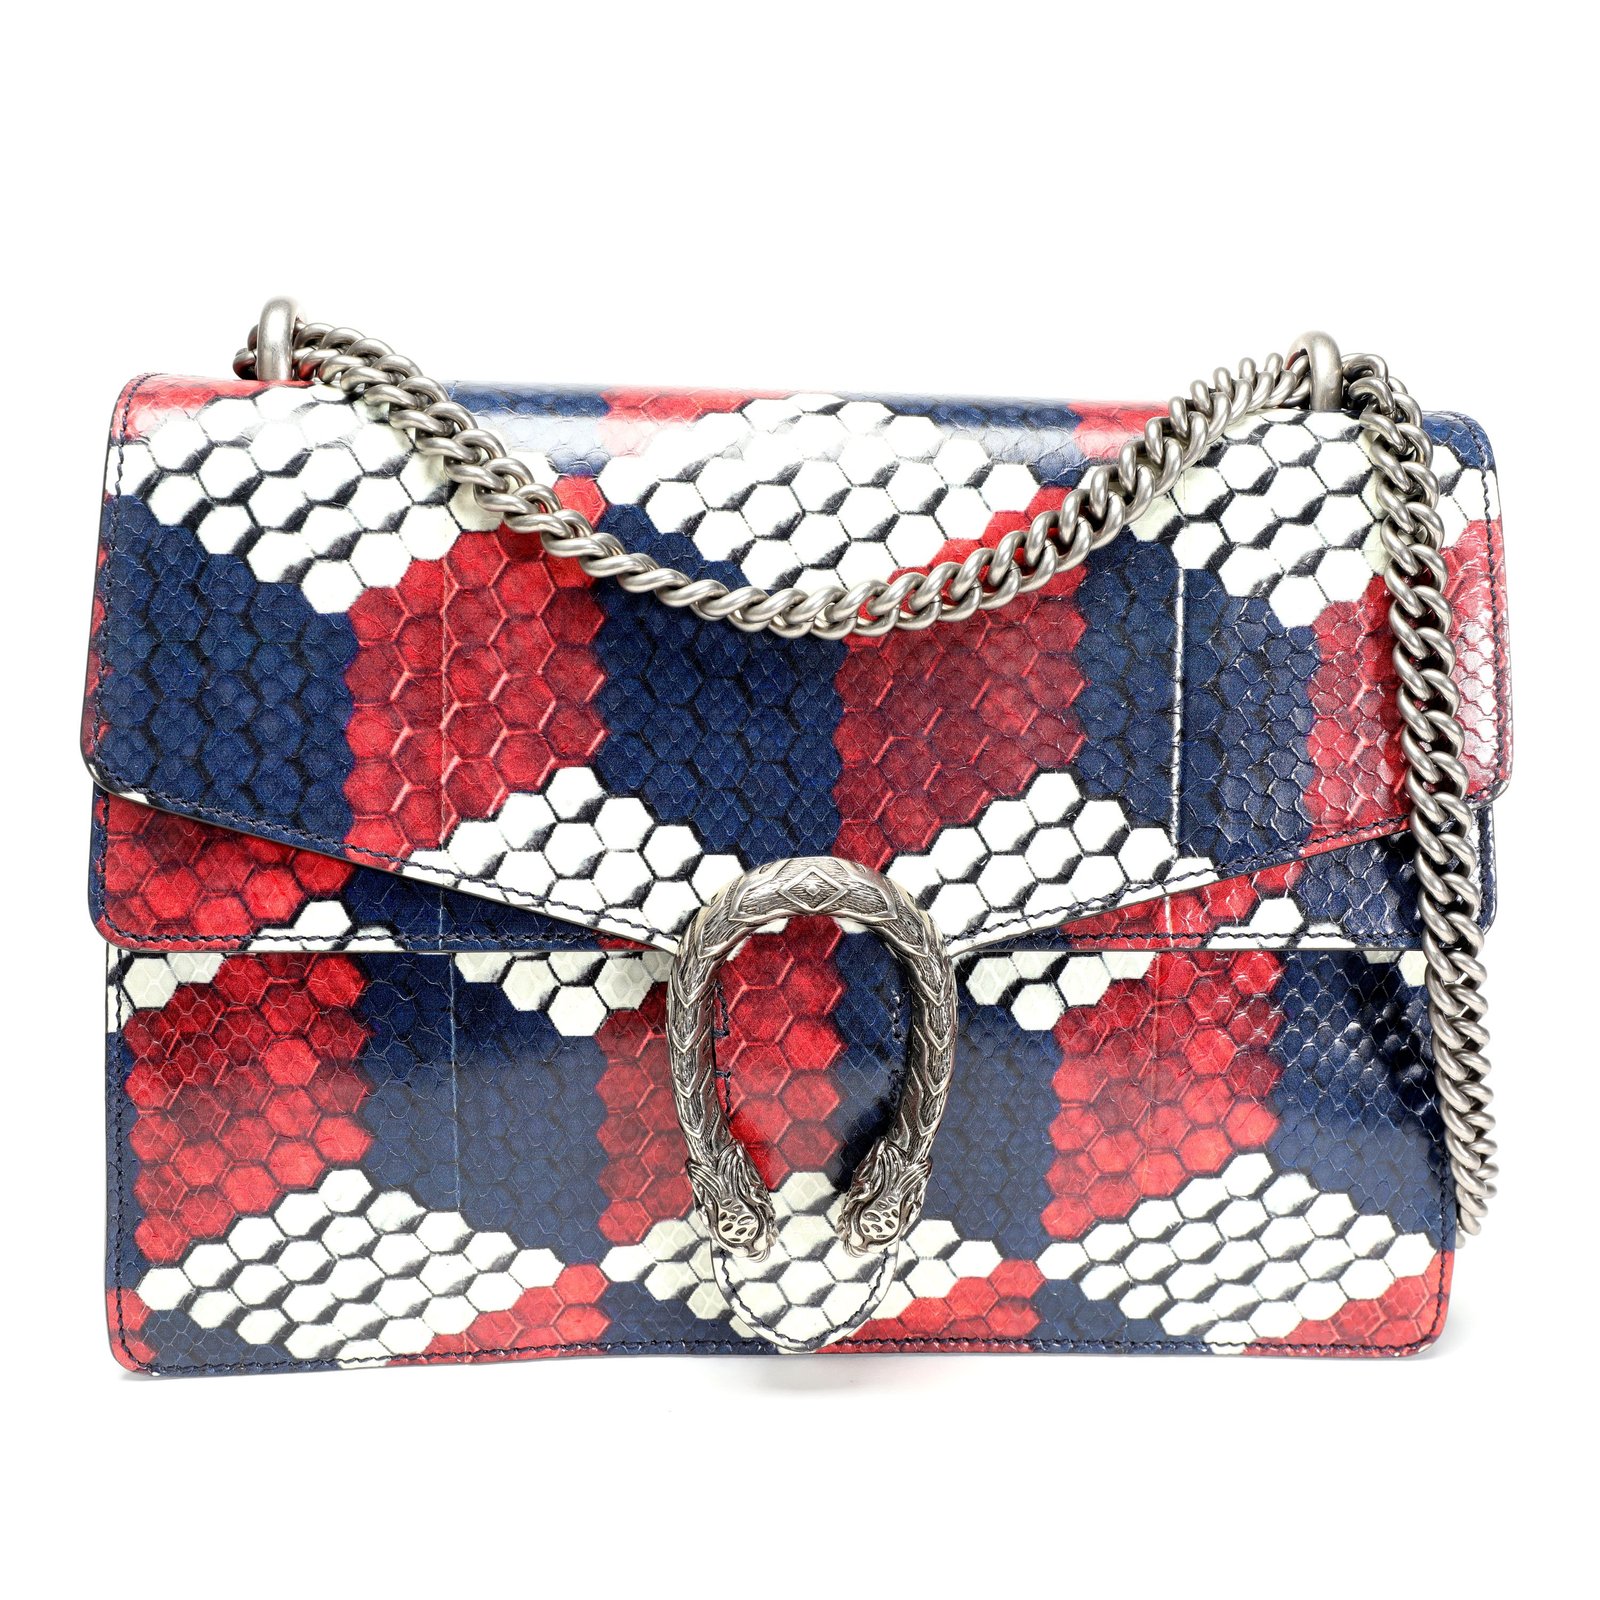 Gucci Red, White, & Blue Geometric Python and 50 similar items